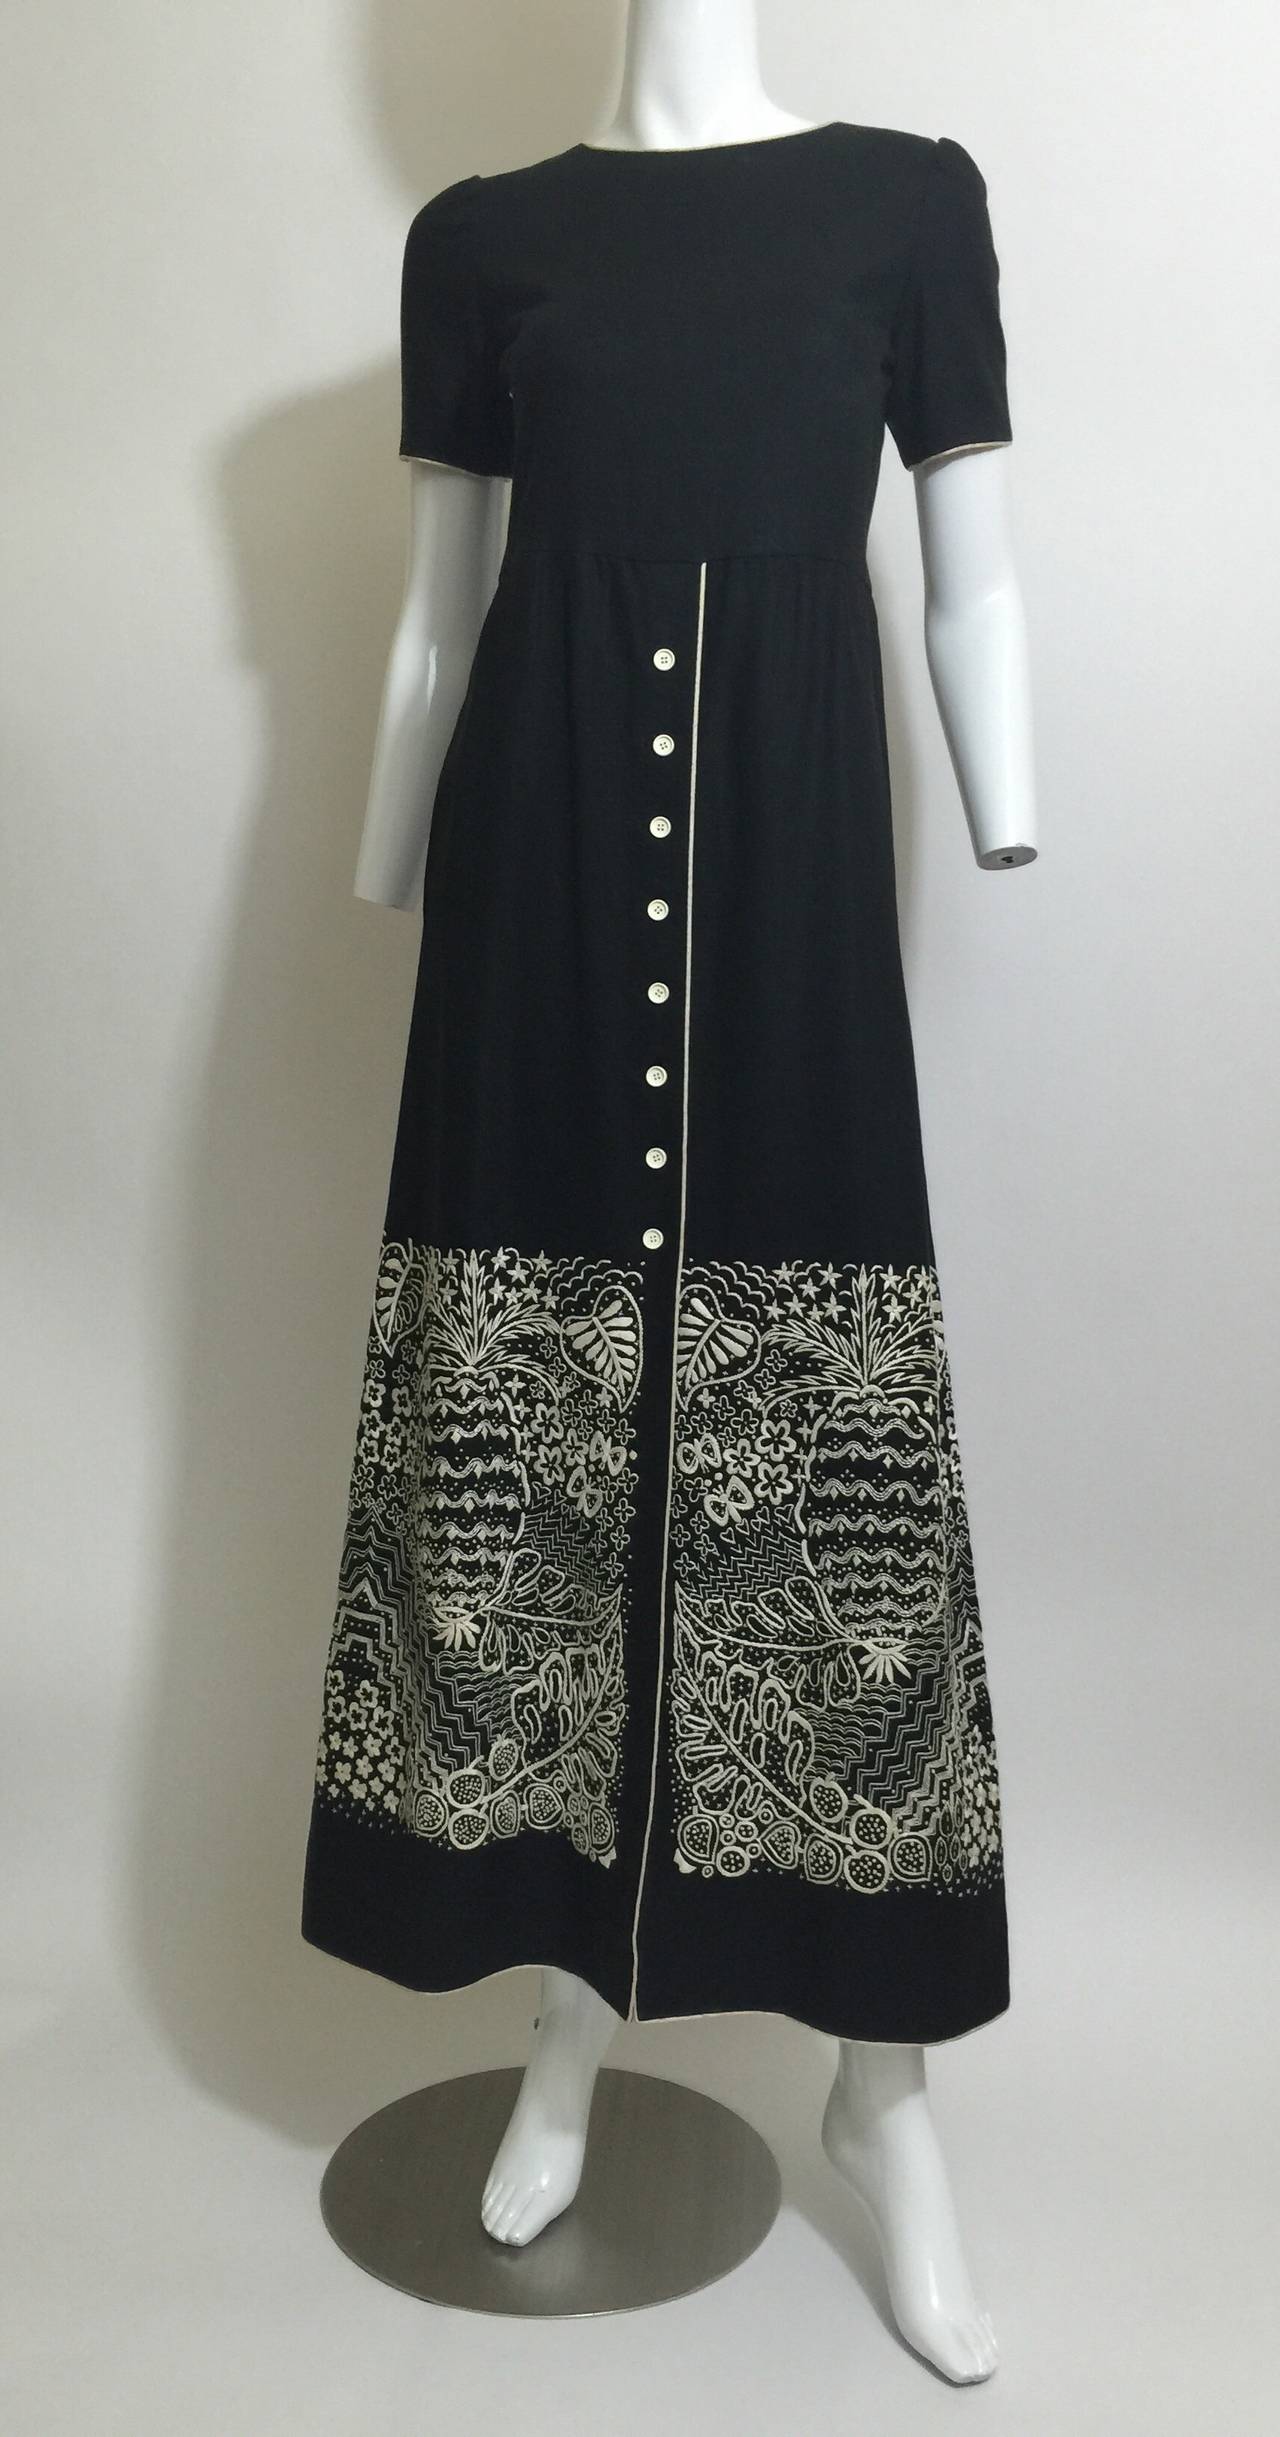 This dress is as impeccable today as it was 50 years ago. The fabric is a black linen with ecru linen piping trimming the neck sleeves and hem line. I am loving the beautiful embroidery work on the skirt portion with a pineapple floral motif. This